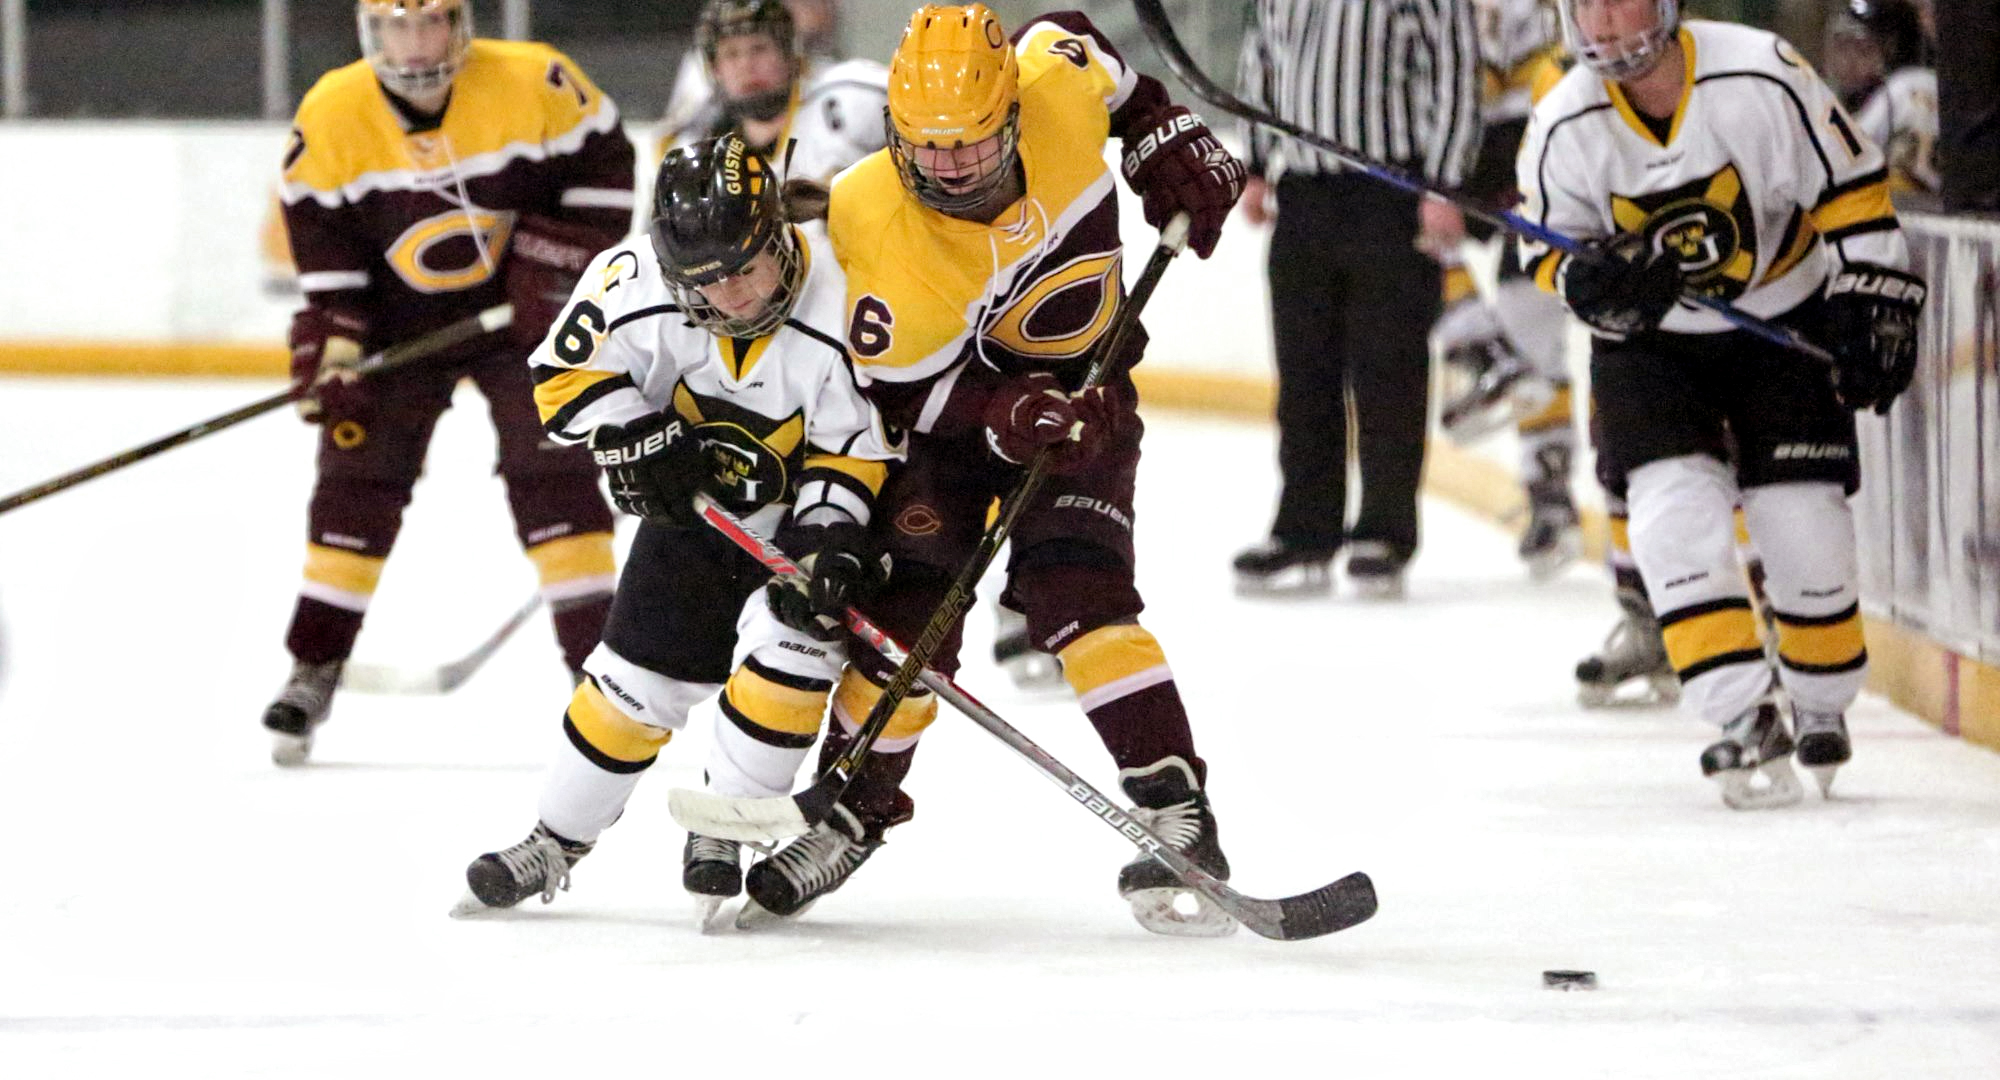 Senior Chelsey Petrich battles with a Gustavus player for the puck during the Cobbers' series opener in St. Peter. (Photo courtesy of Roisen Granlund - Gustavus sports information dept.)